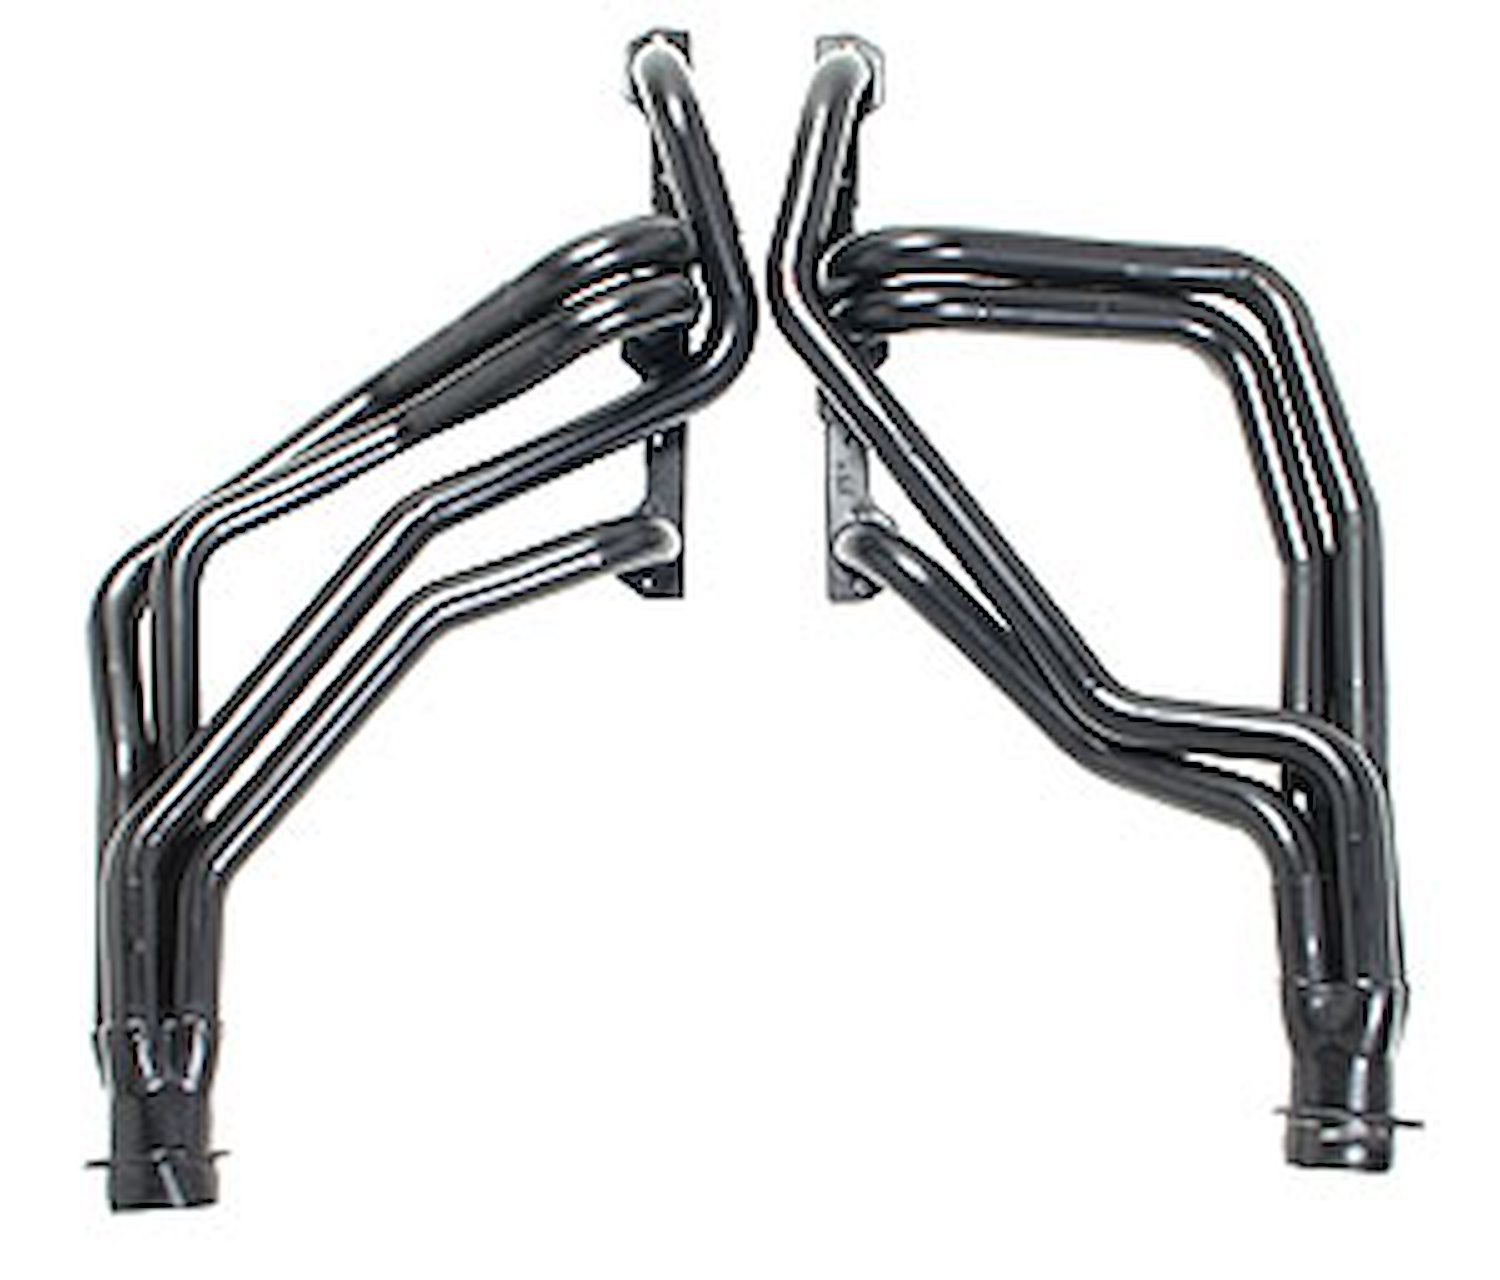 S10 Engine Swap Headers 1982-1993 Chevy S10 with Small Block Chevy